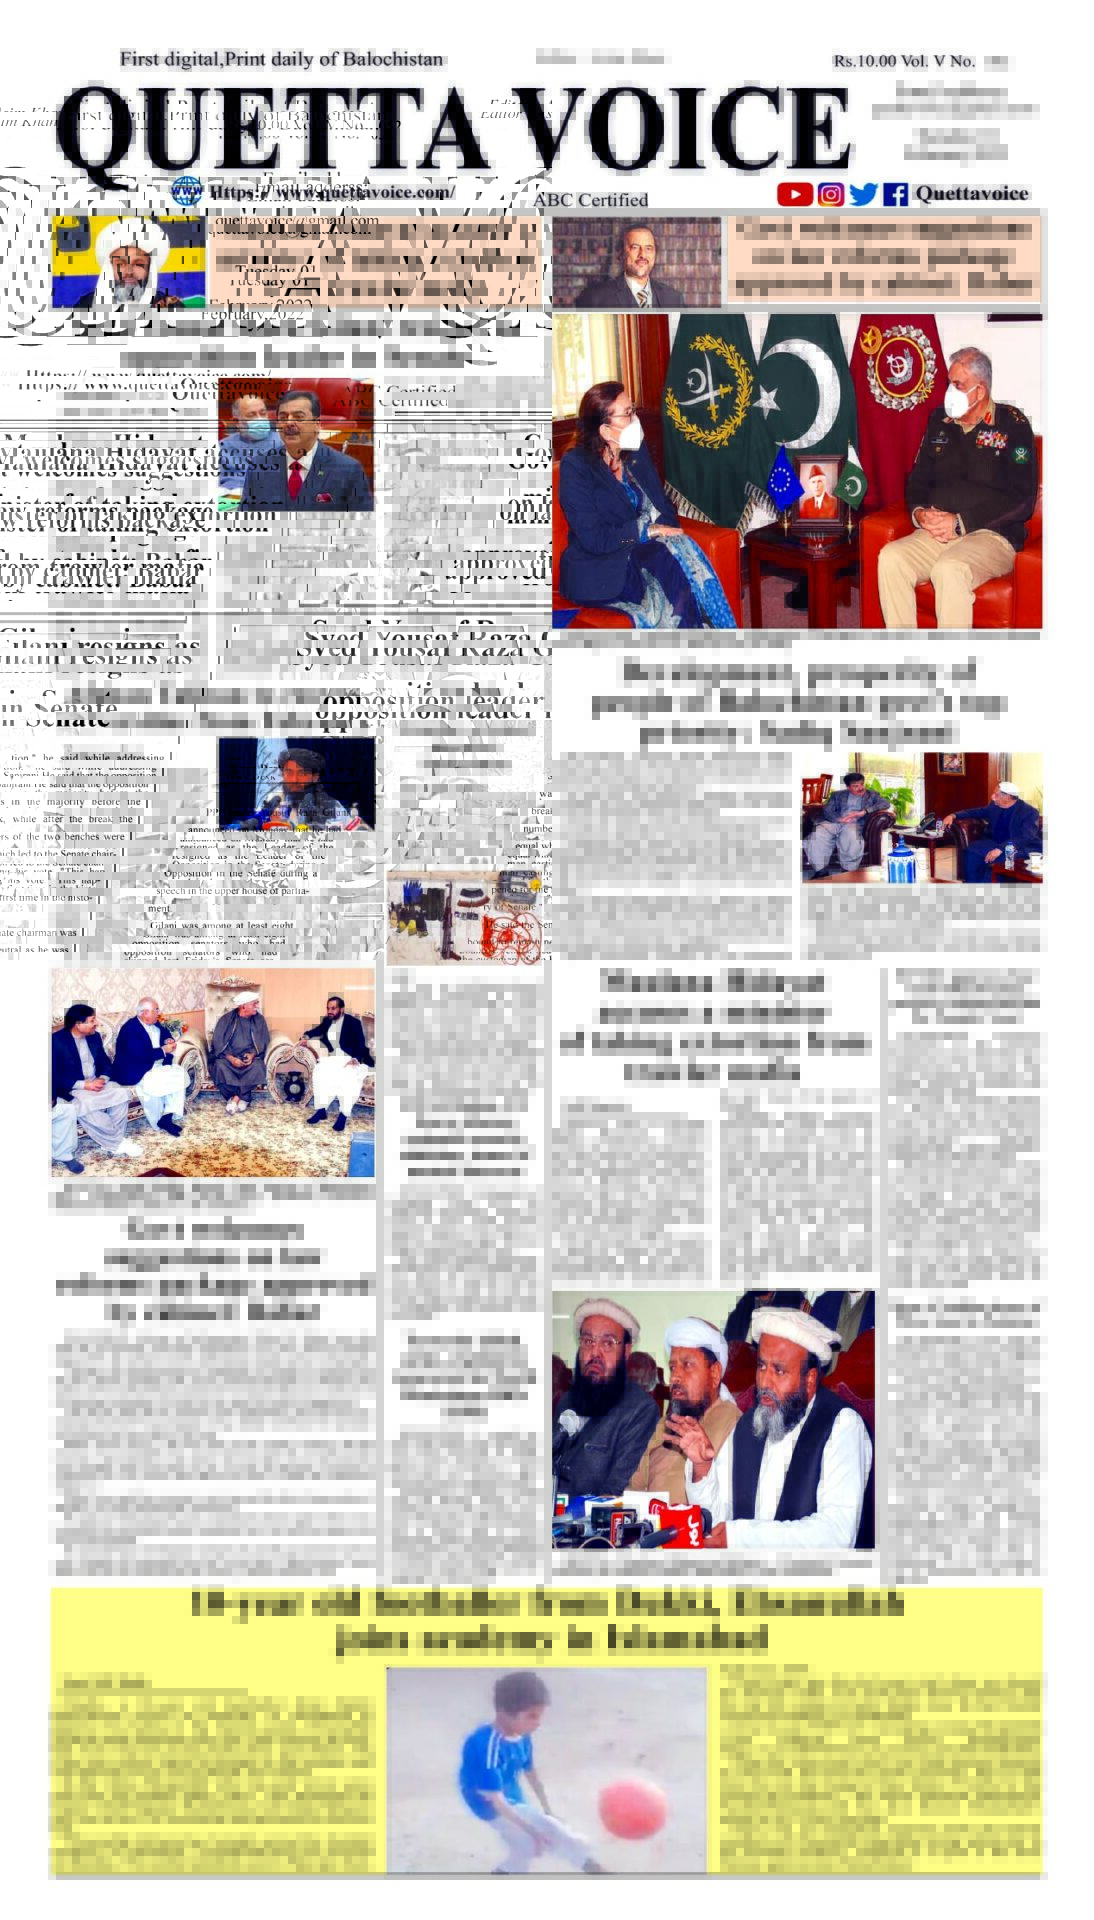 Today's Quetta Voice Newspaper, Tuesday, February 1, 2022